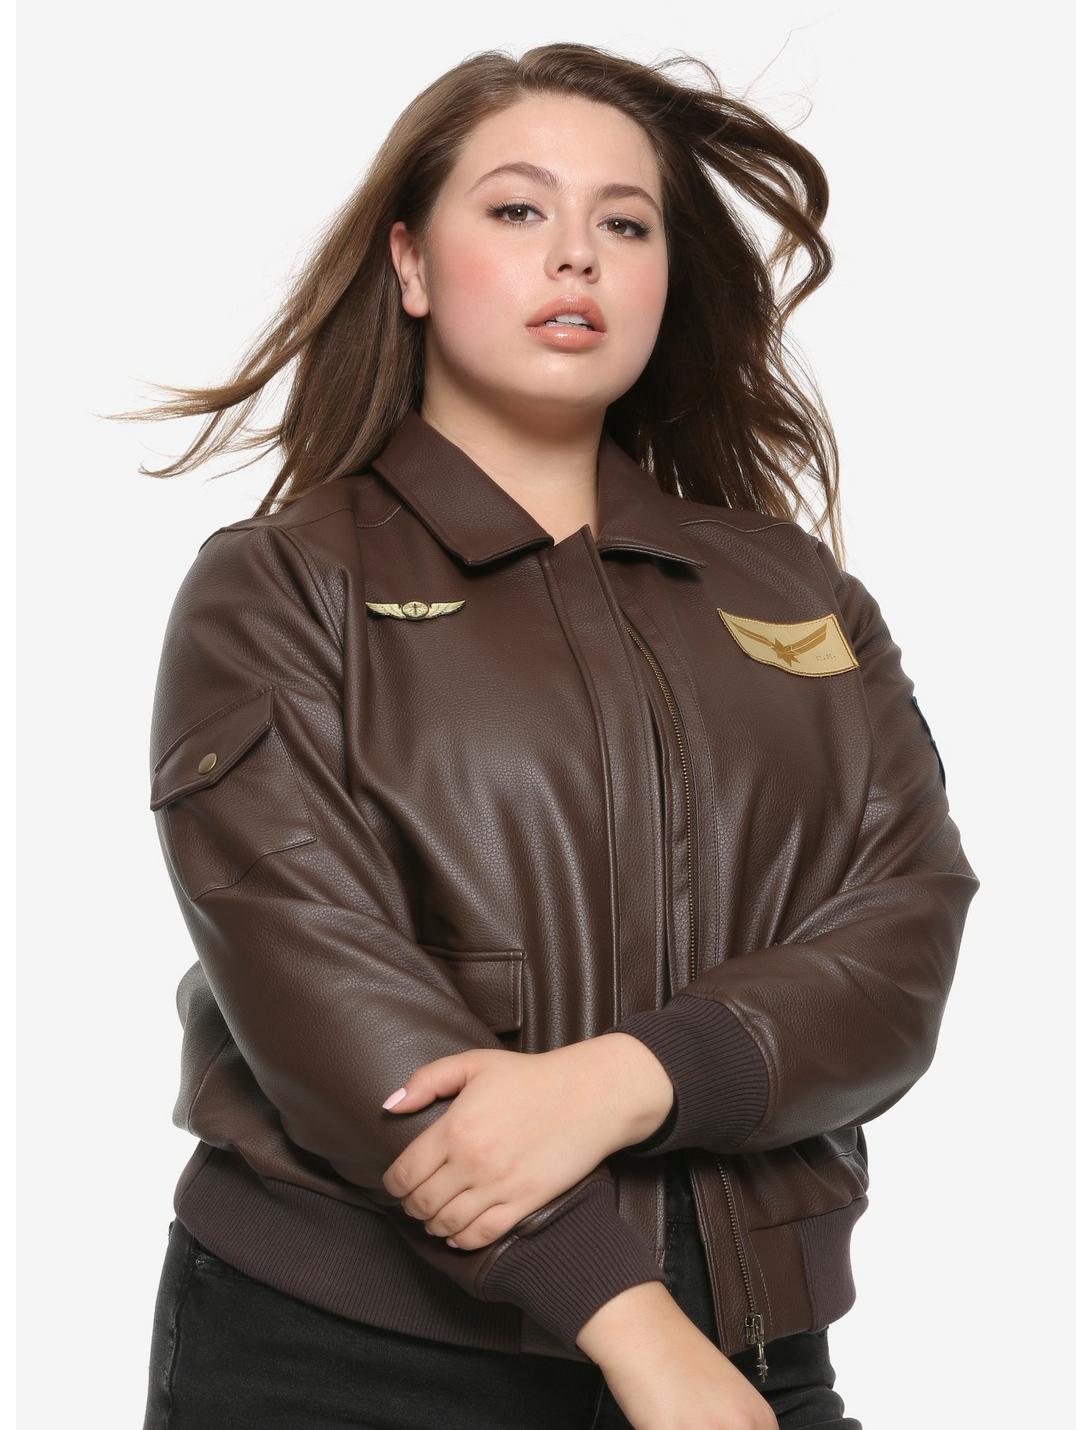 Her Universe Marvel Captain Marvel Cosplay Girls Faux Leather Aviator Jacket Plus Size, MULTI, hi-res